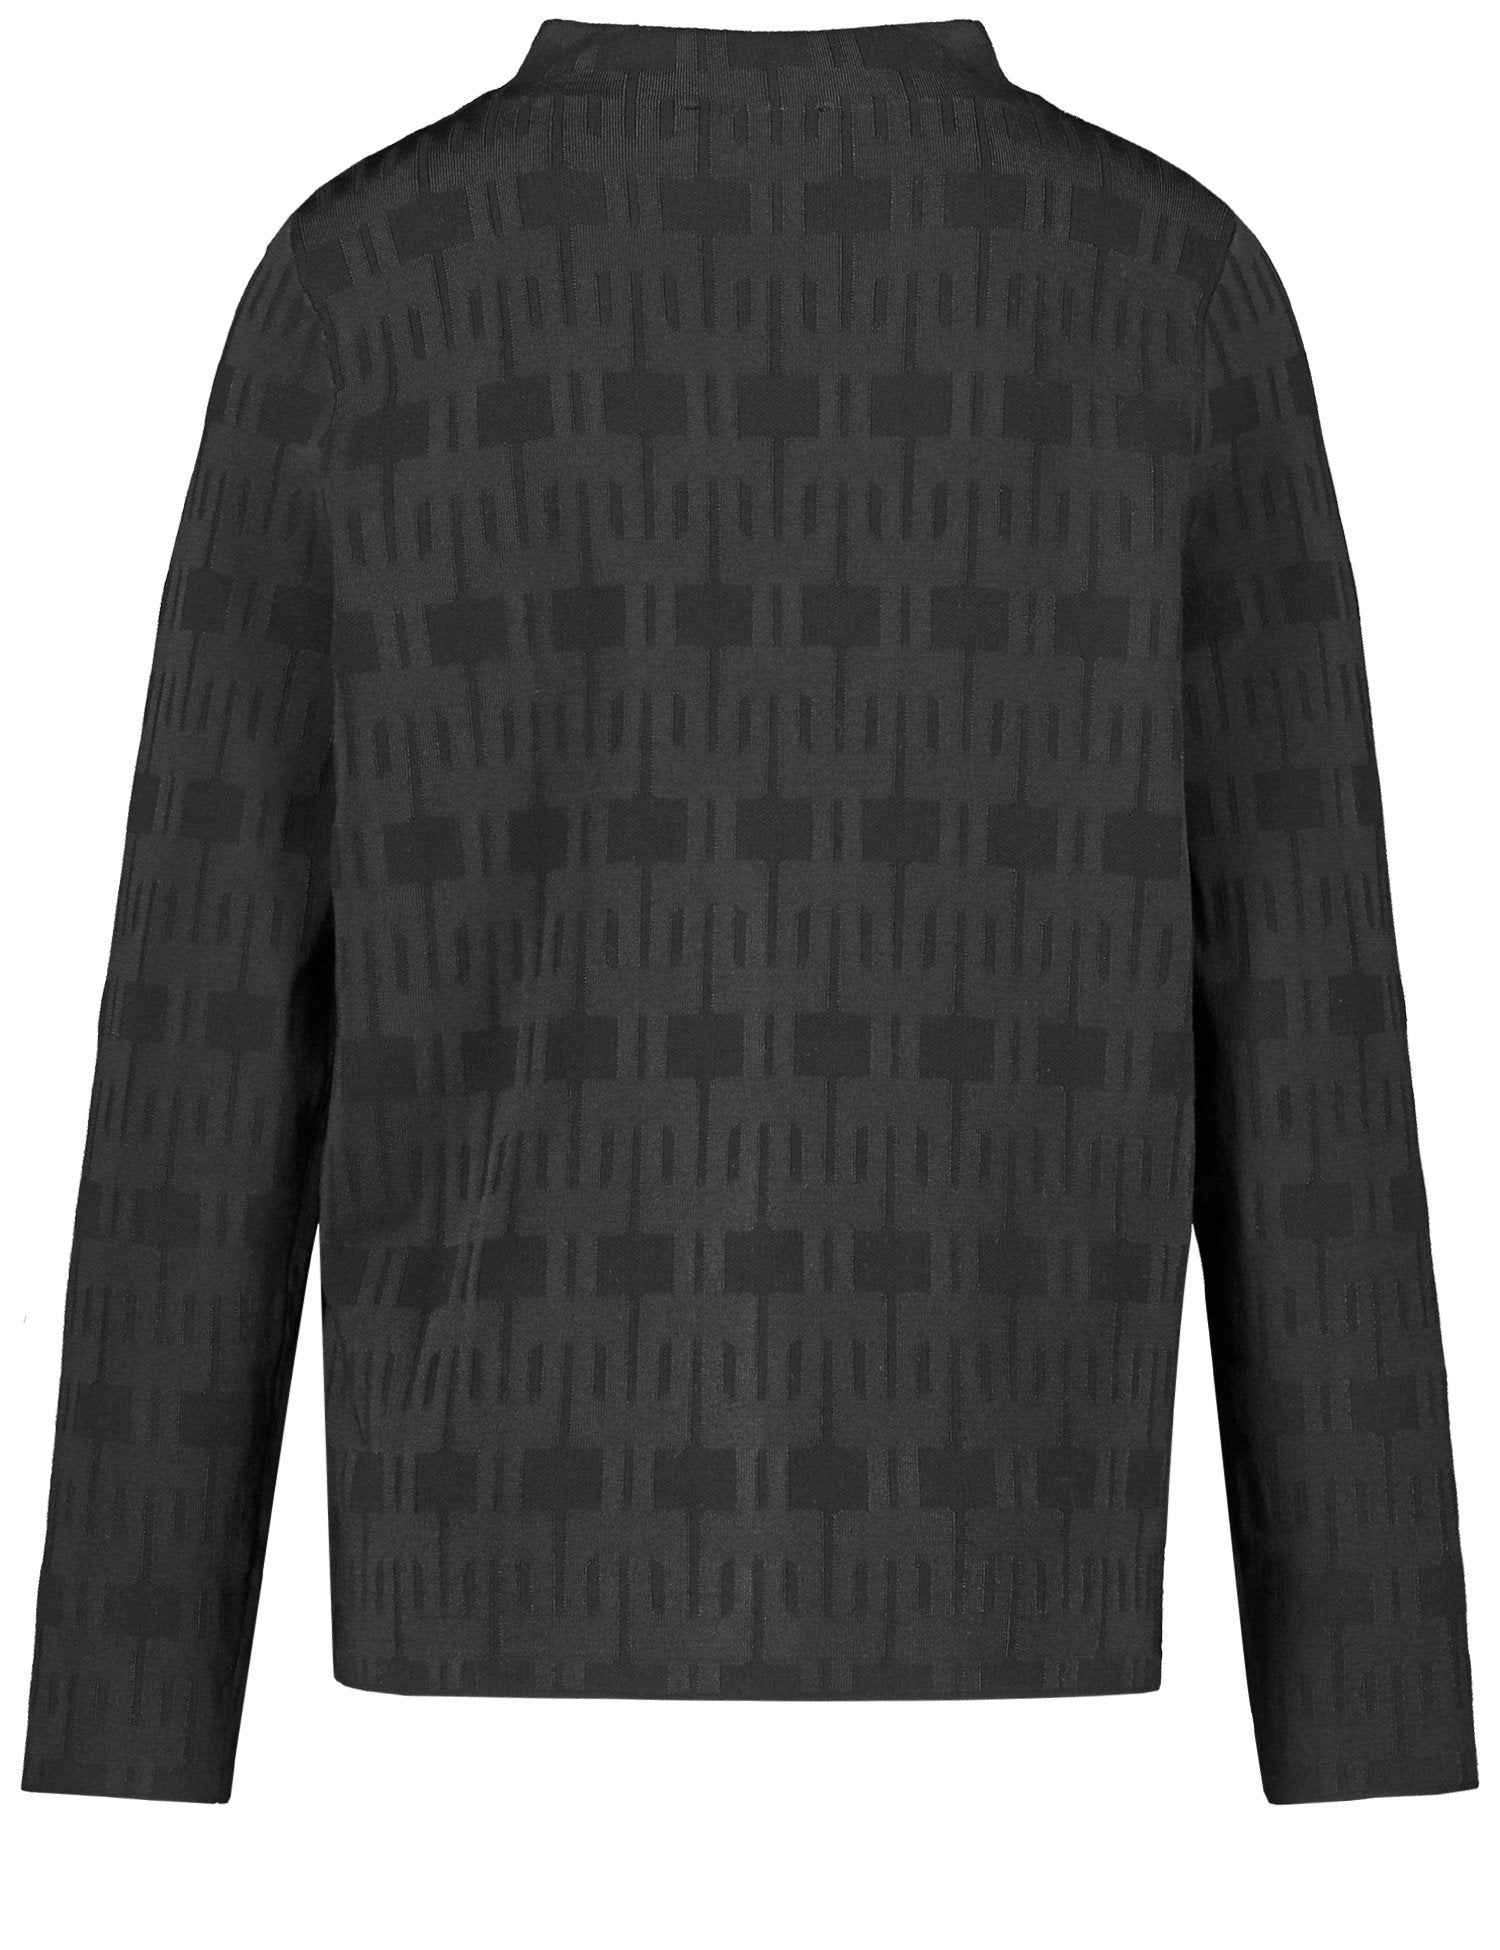 Jumper With A Short Stand Up Collar And A Jacquard Pattern_271022-35719_11000_03